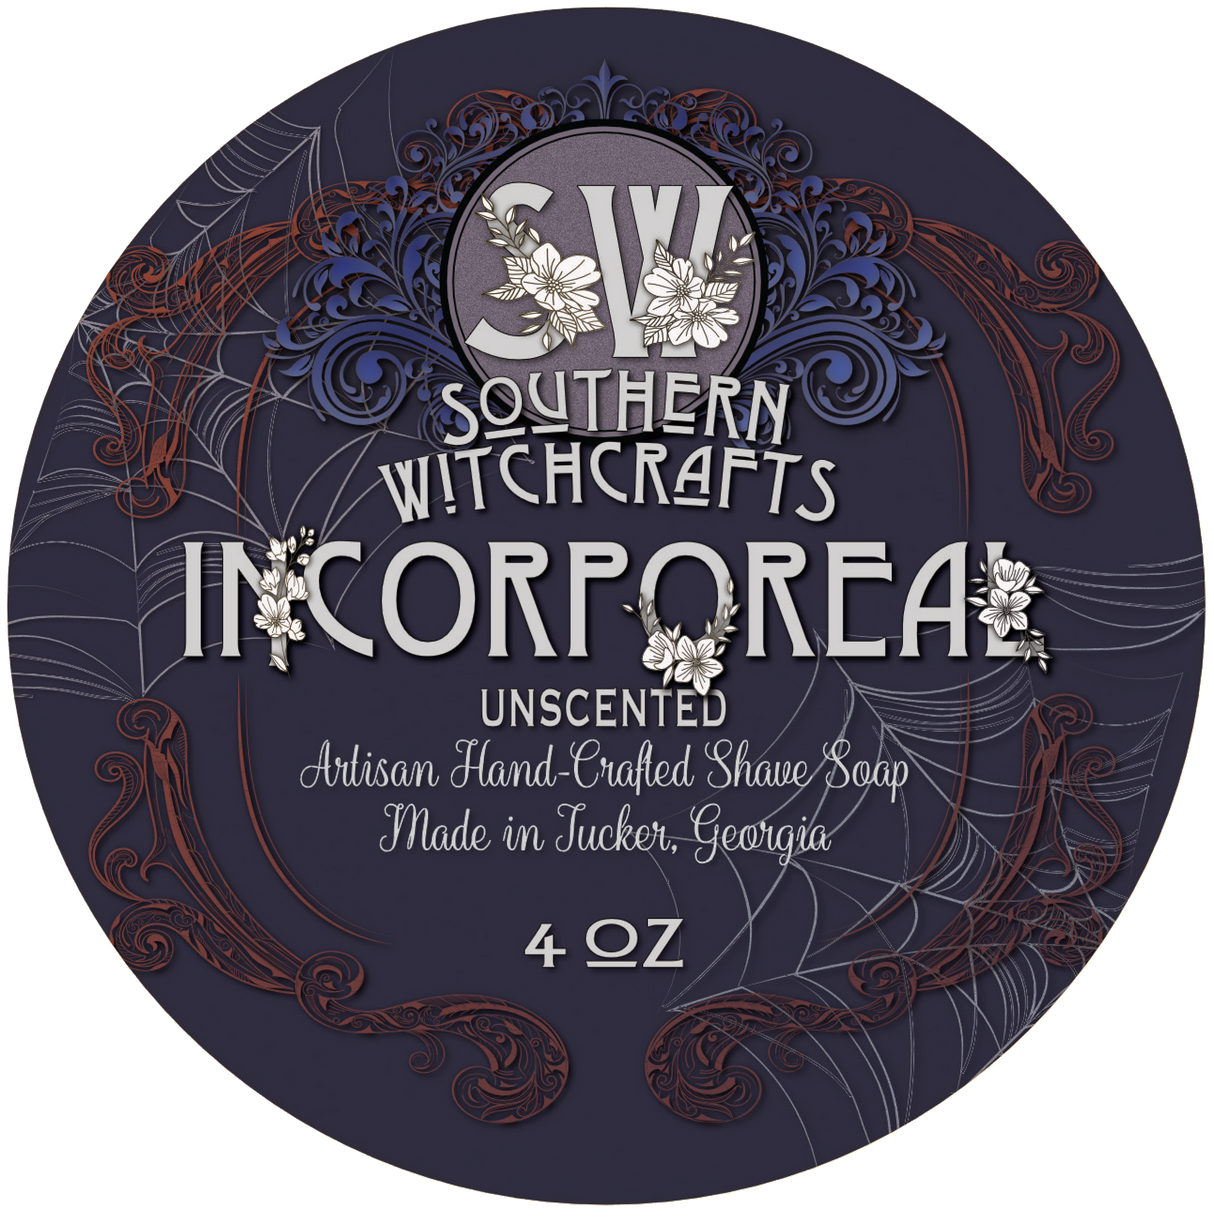 Southern Witchcrafts - Vegan (Unscented) Shave Soap - Incorporeal